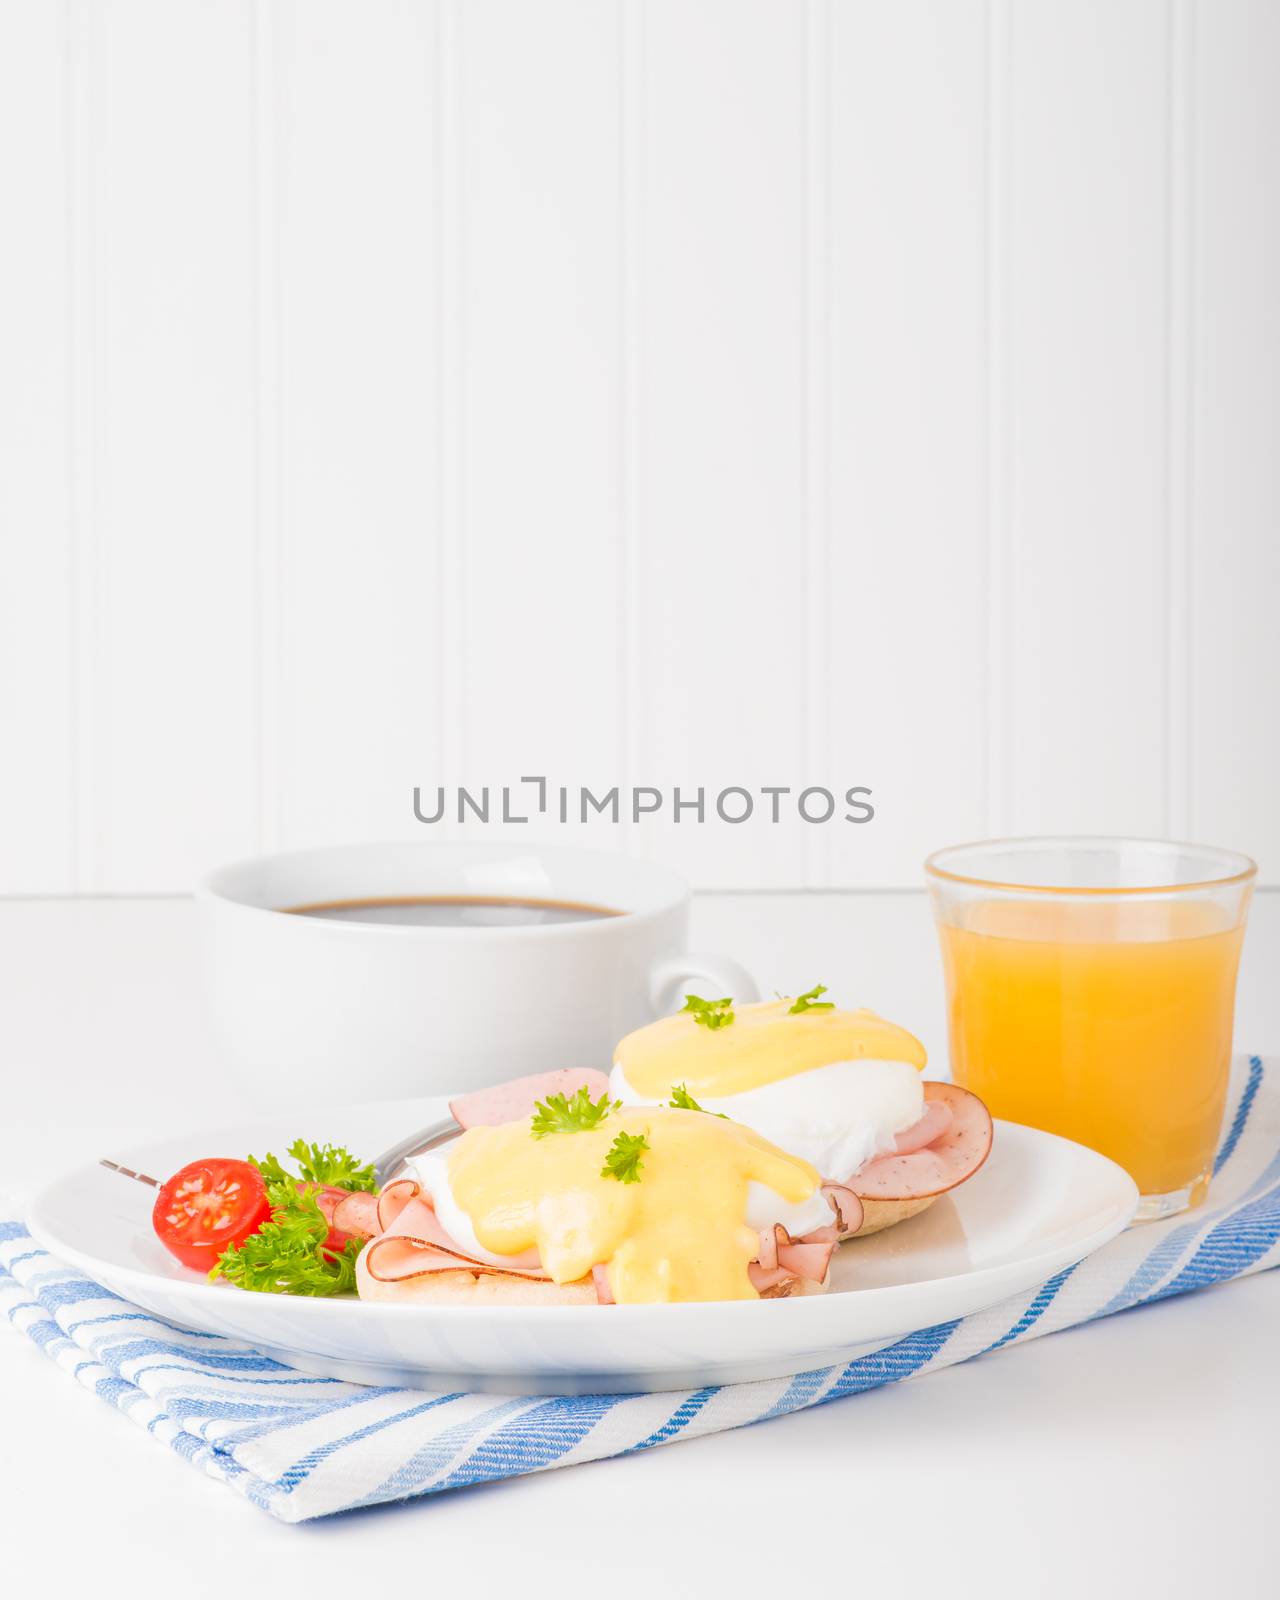 Delicious eggs benedict served with fresh coffee and juice.